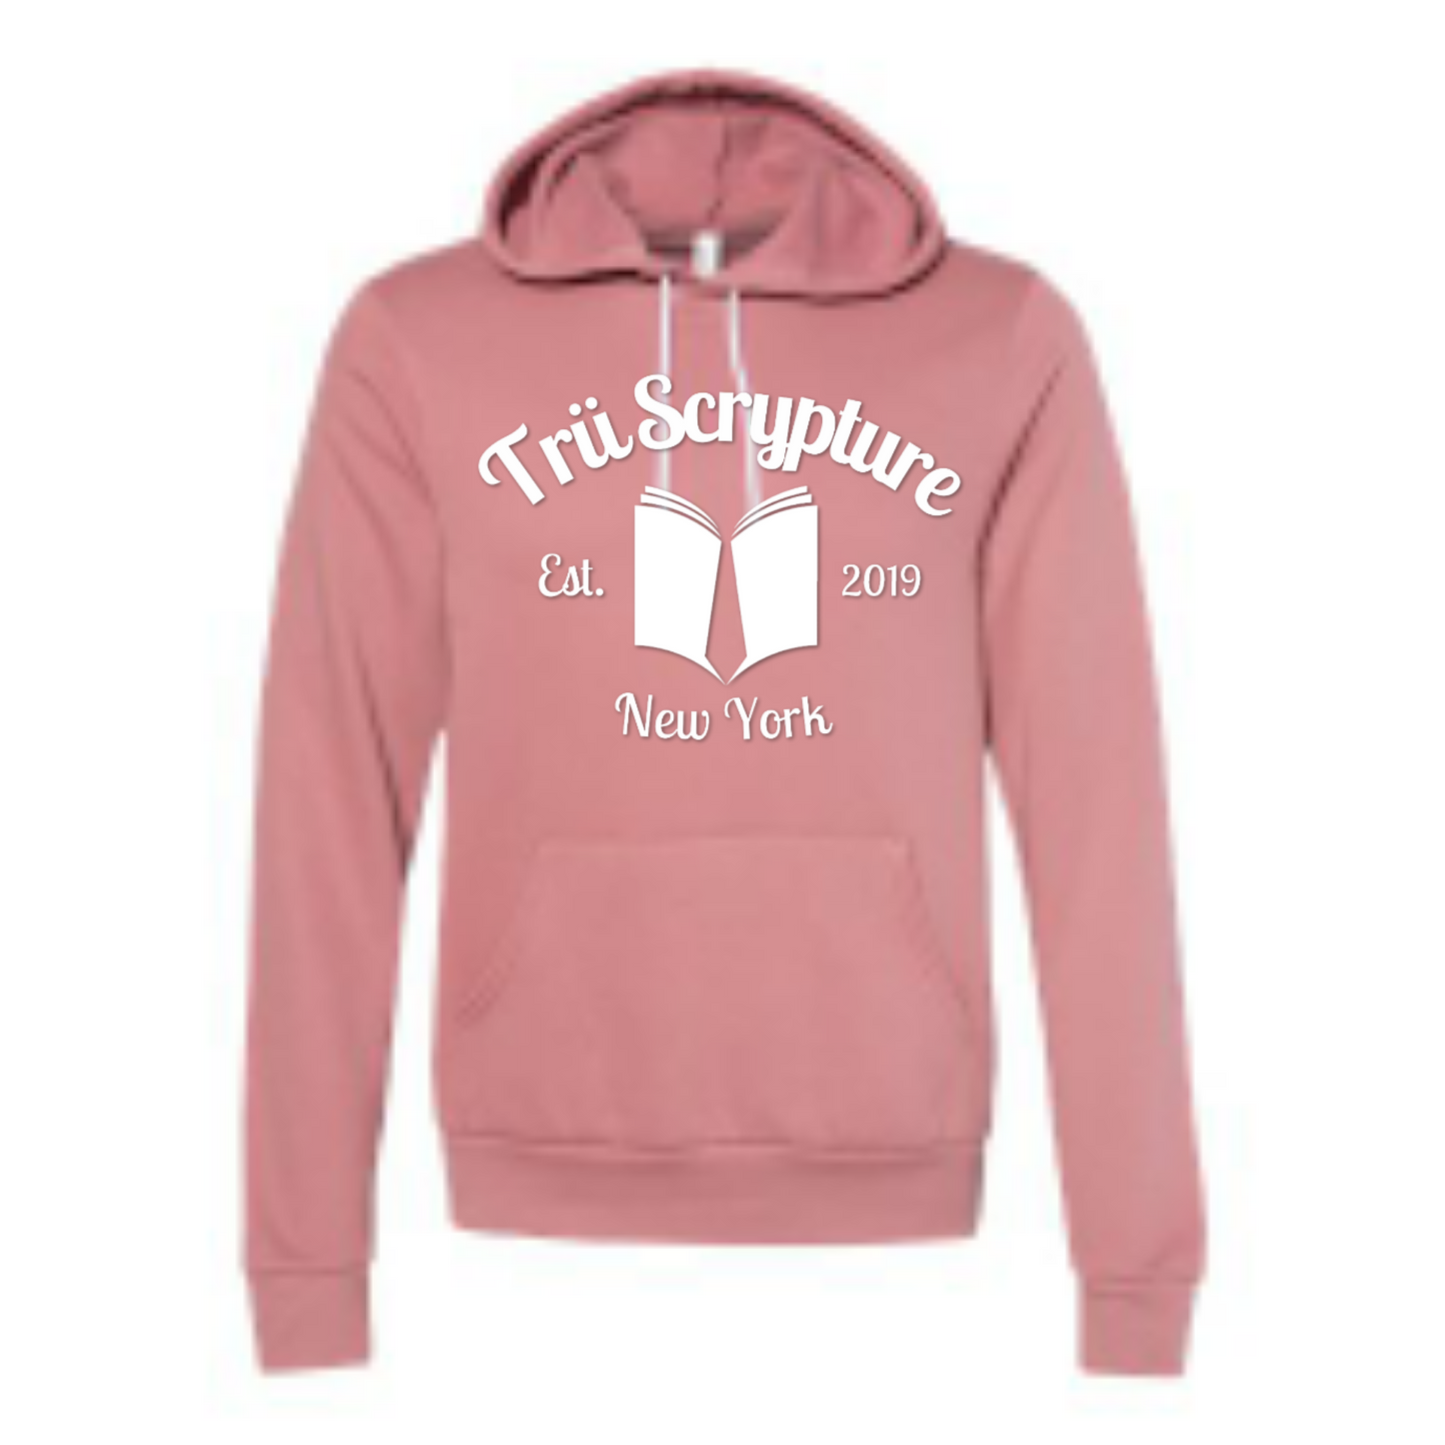 Picture of the Trü University Hoodie in Mauve.